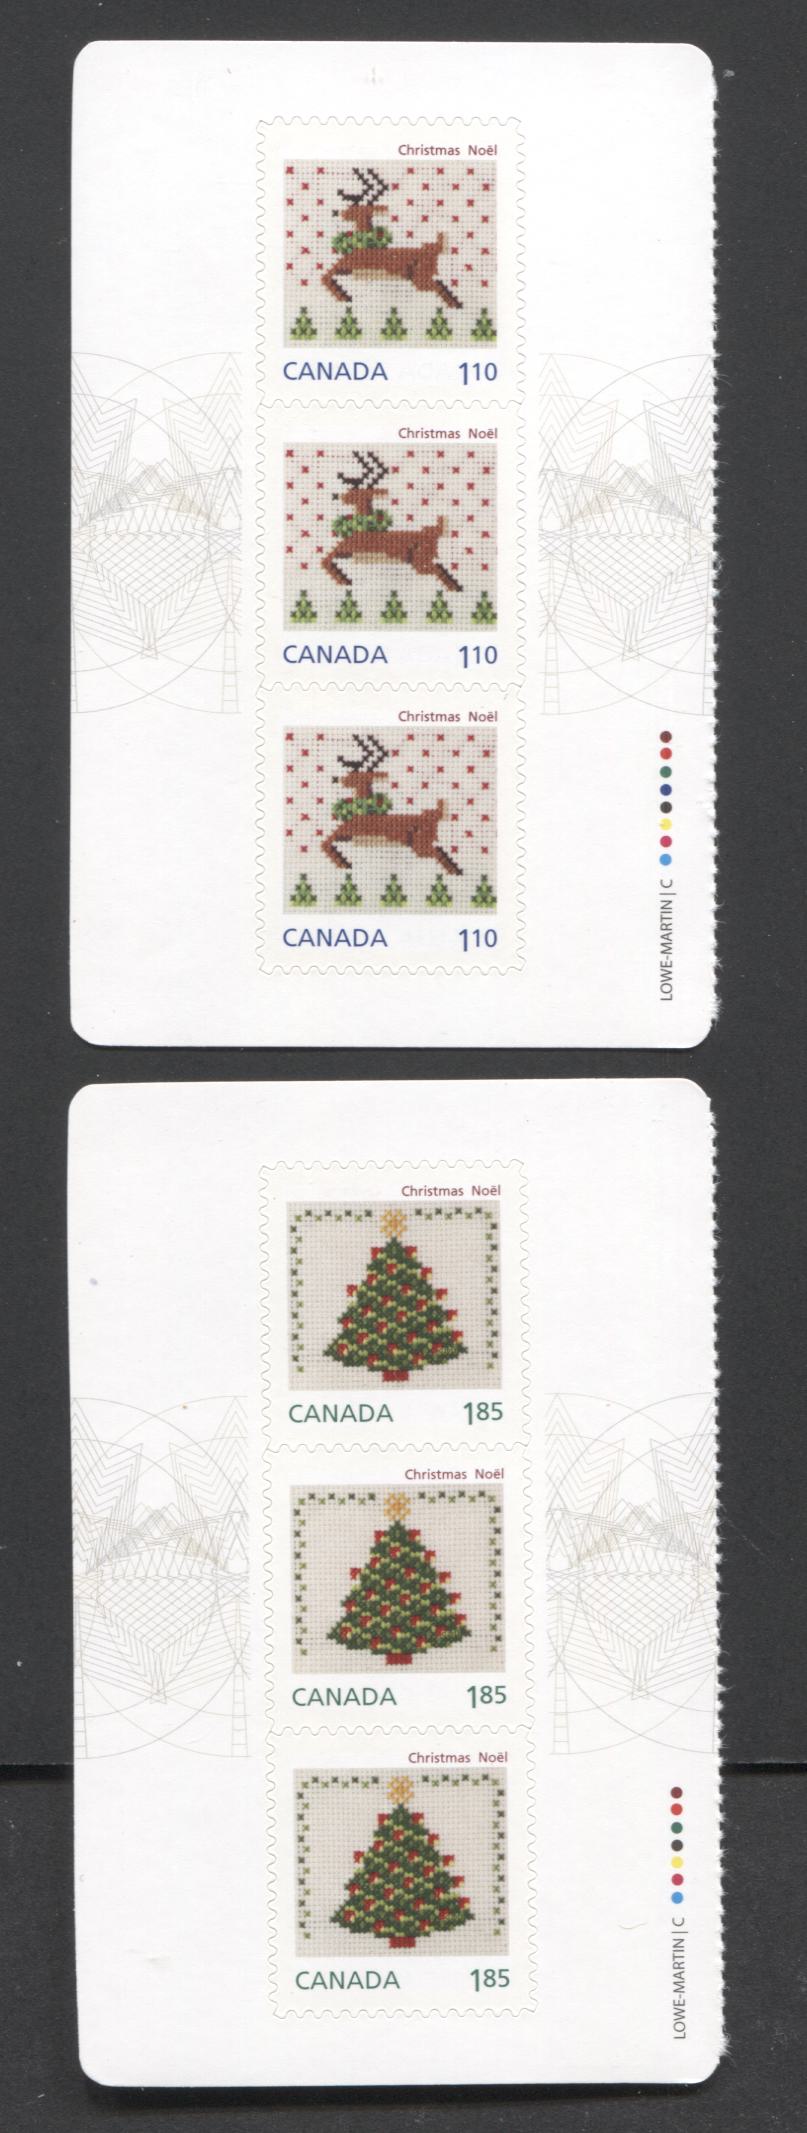 Lot 17 Canada #2690-2691 $1.10-$1.85 Multicolored Cross Stitched Reindeer-Christmas Tree, 2013 Christmas Issue, 2 VFNH Booklet Panes Of 6